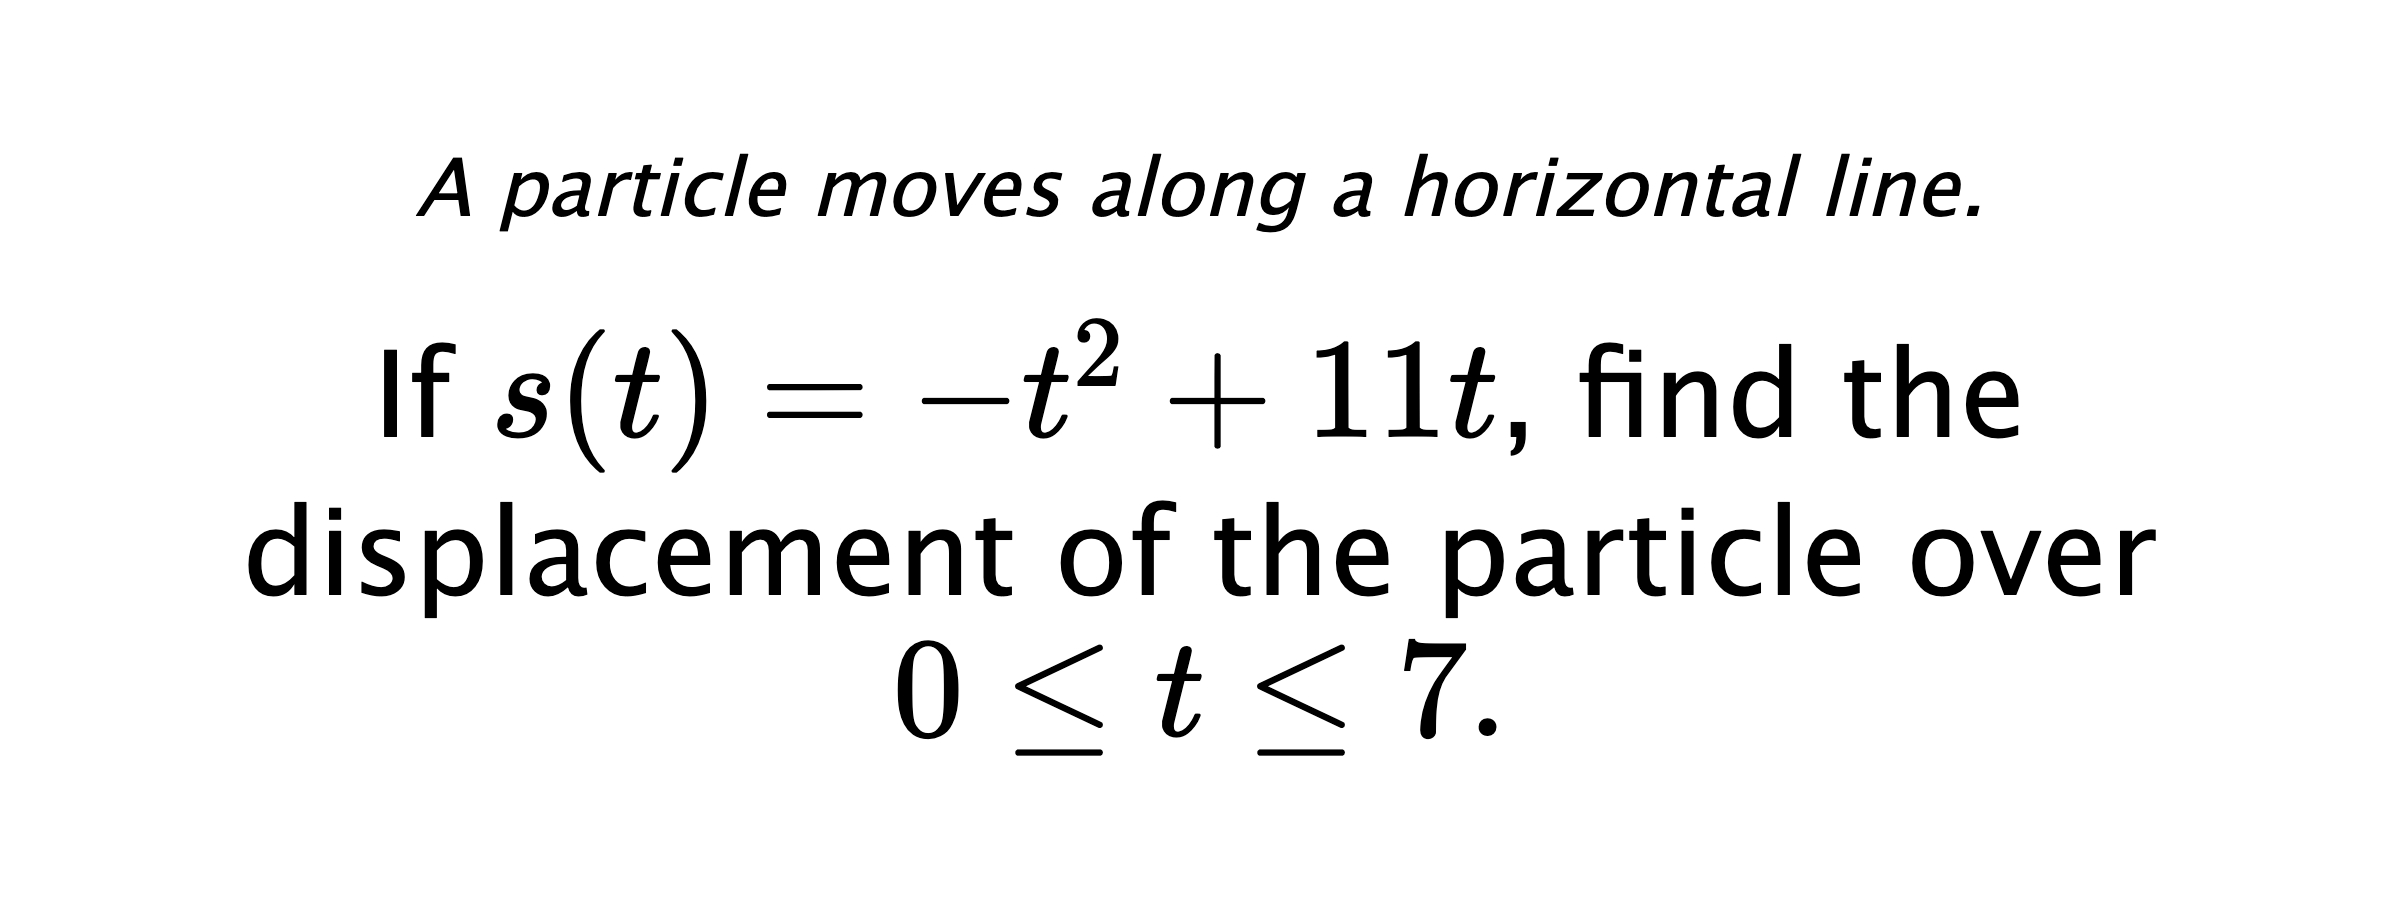 A particle moves along a horizontal line. If $ s(t)=-t^2+11t $, find the displacement of the particle over $ 0 \leq t \leq 7 .$